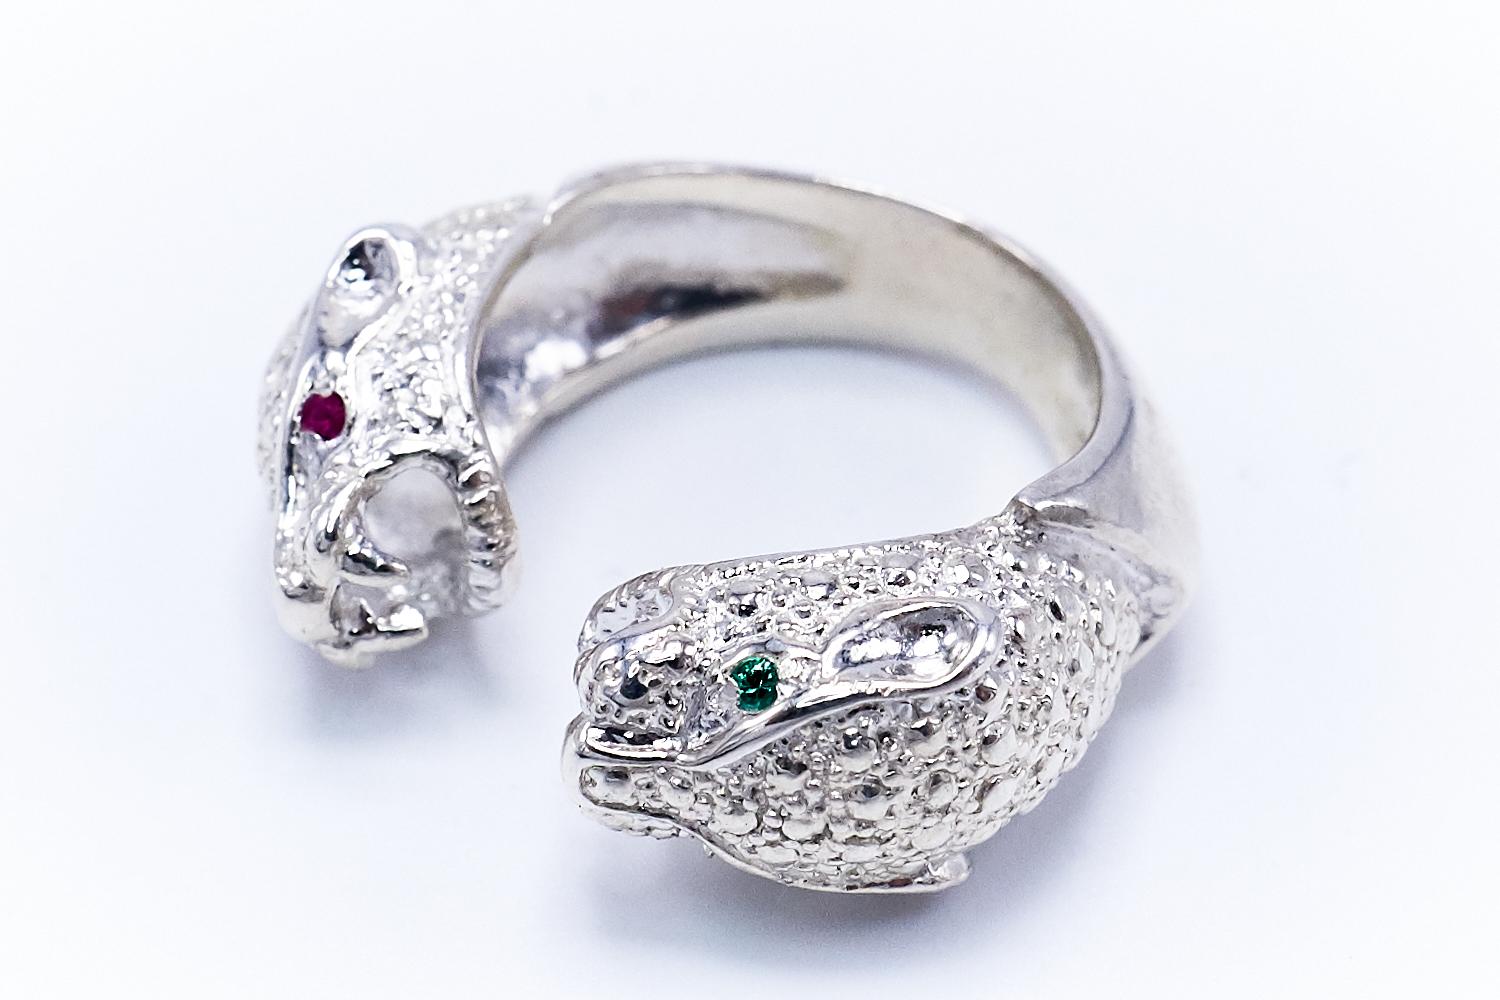 Contemporary Jaguar Ring White Gold Emerald Ruby Statement Ring Animal Jewelry J Dauphin For Sale